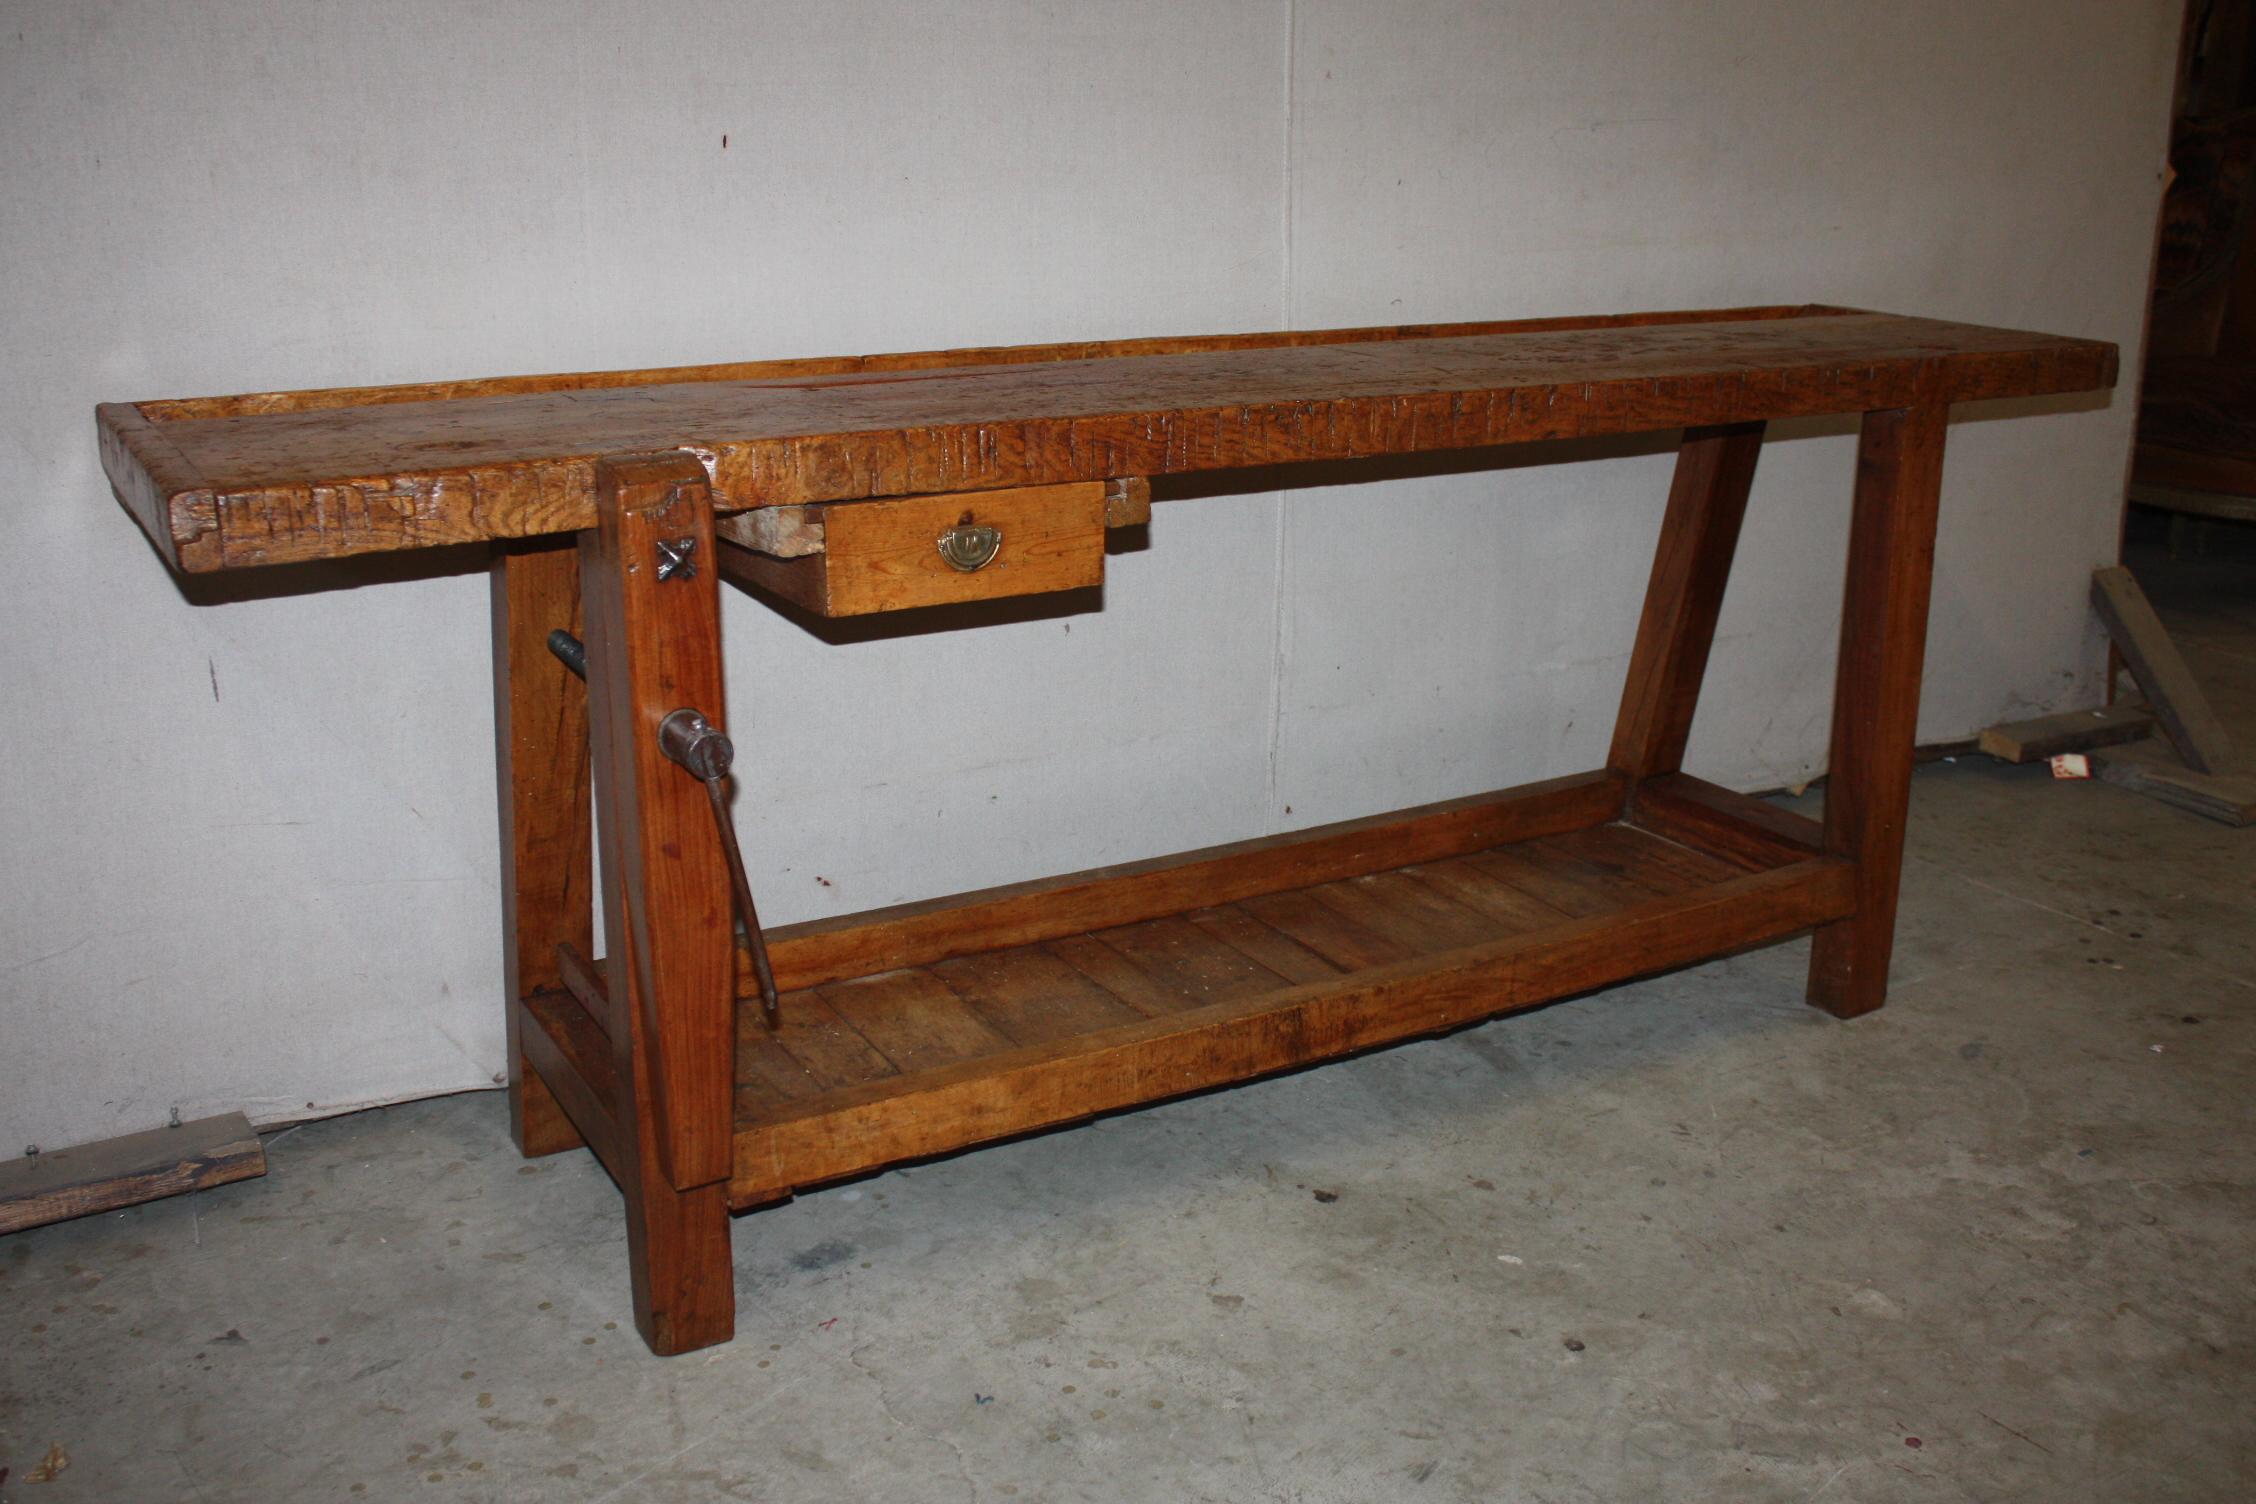 This is a very nice French workbench that dates to the mid-1800s. It has a wood vice and a single drawer. There is a trough along the back edge that is typical of workbenches of this age.